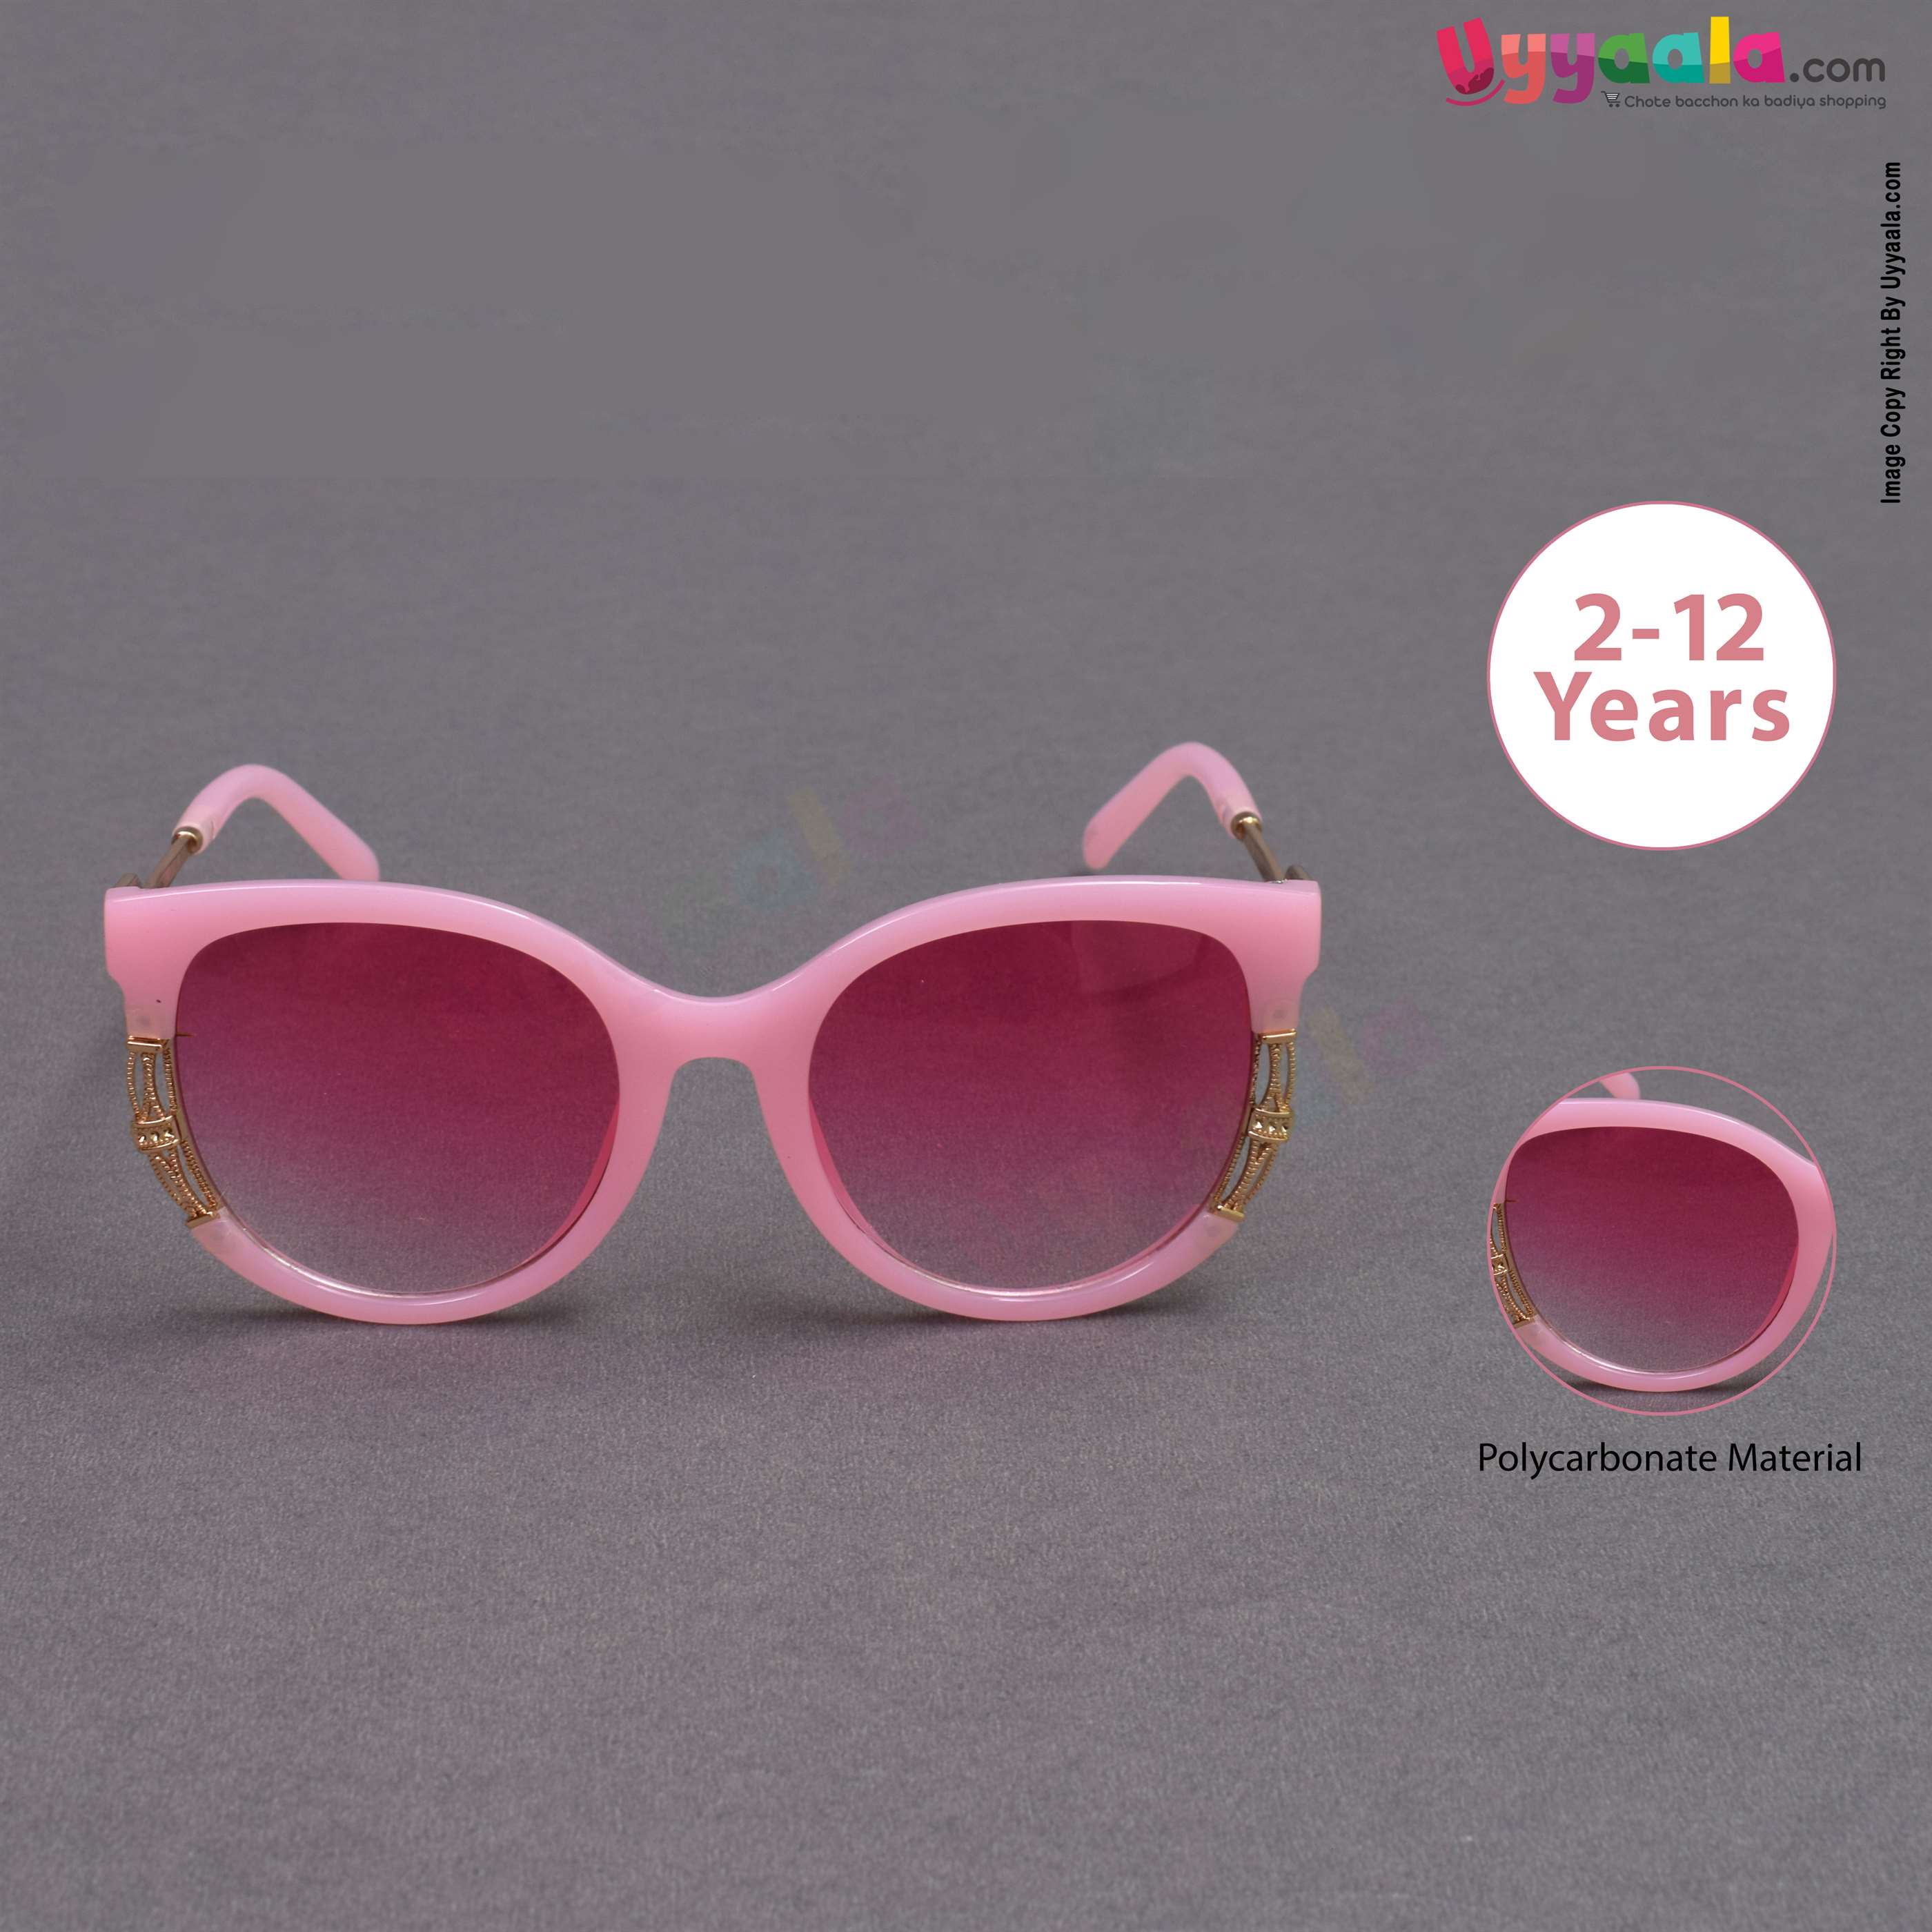 Fancy cat-eye tinted sunglasses for kids - pink, 2 - 12 years